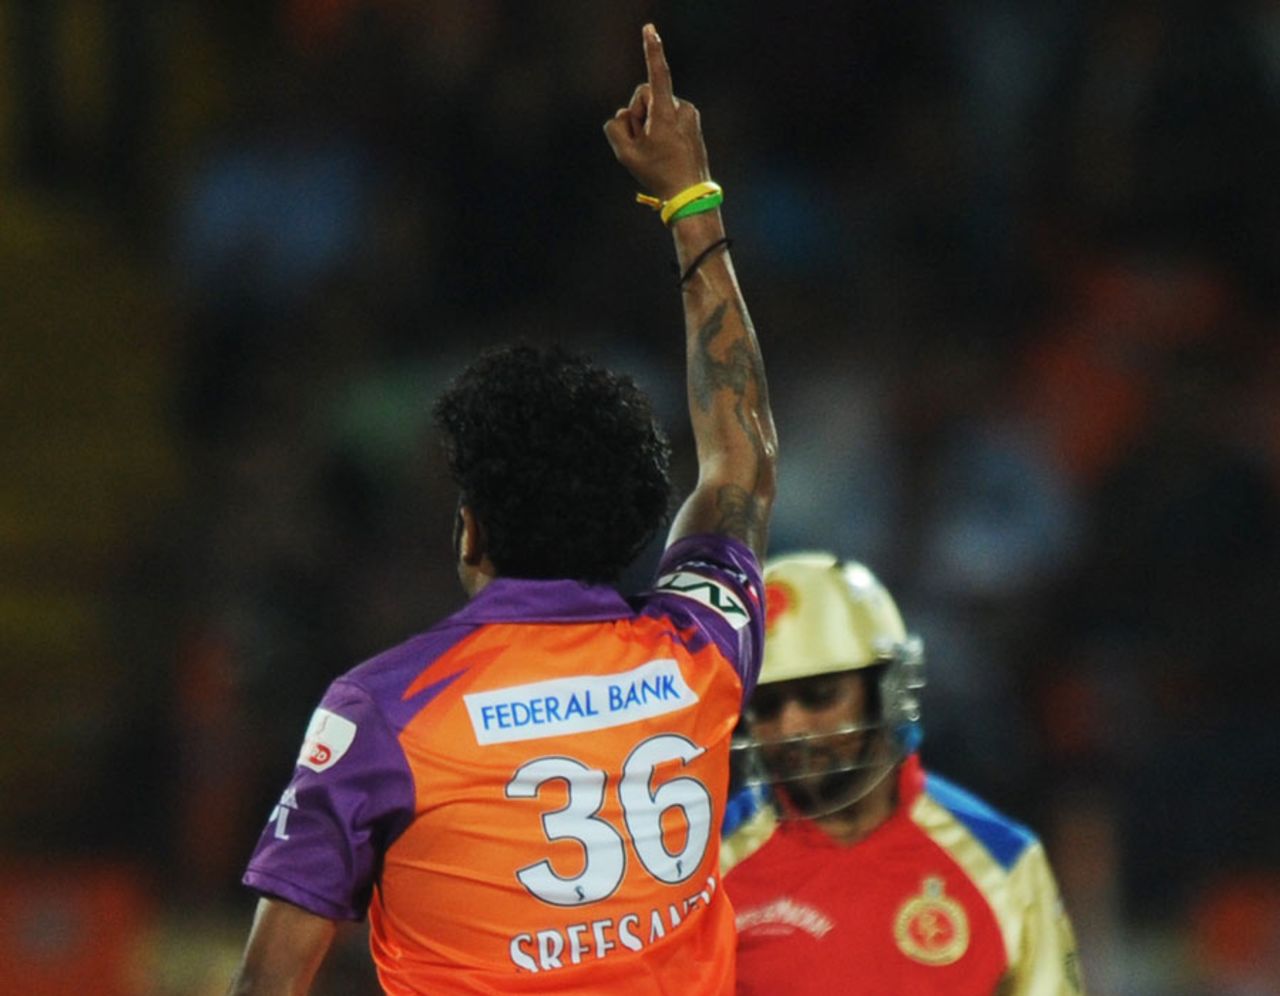 The crowd was delighted when Sreesanth struck in his first over, Kochi Tuskers Kerala v Royal Challengers Bangalore, IPL 2011, Kochi, April 9, 2011